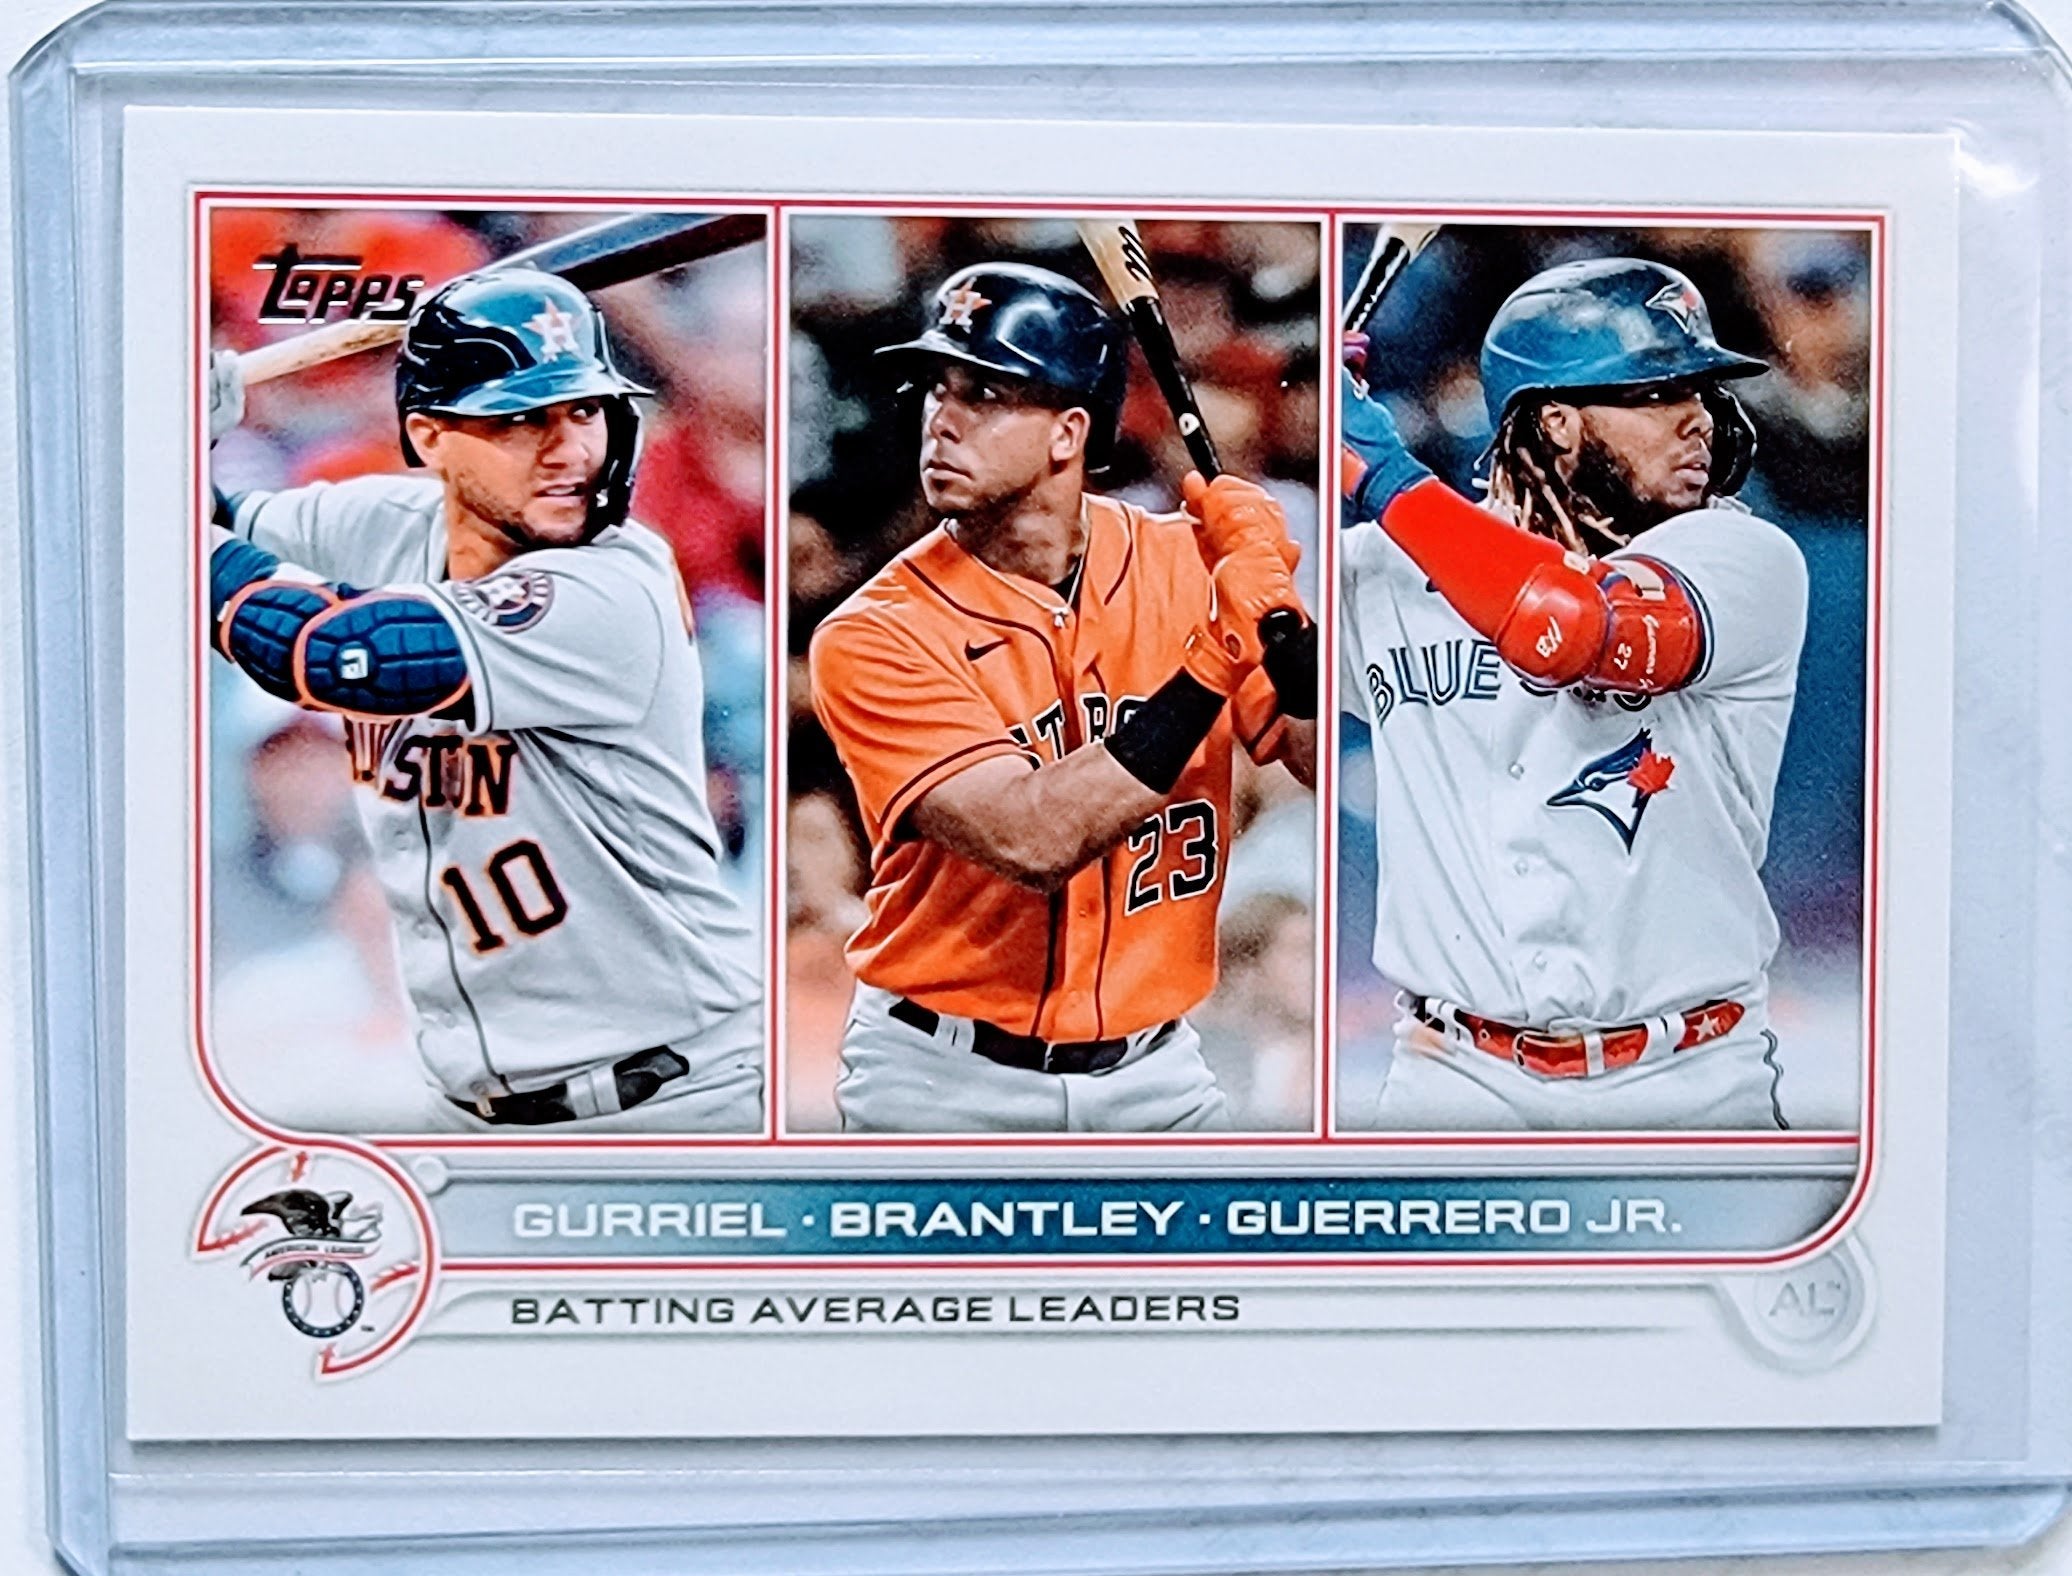 2022 Topps Batting Average Leaders Gurriel, Brantley, Guerrero Jr MLB Leaders Baseball Trading Card GRB1 simple Xclusive Collectibles   